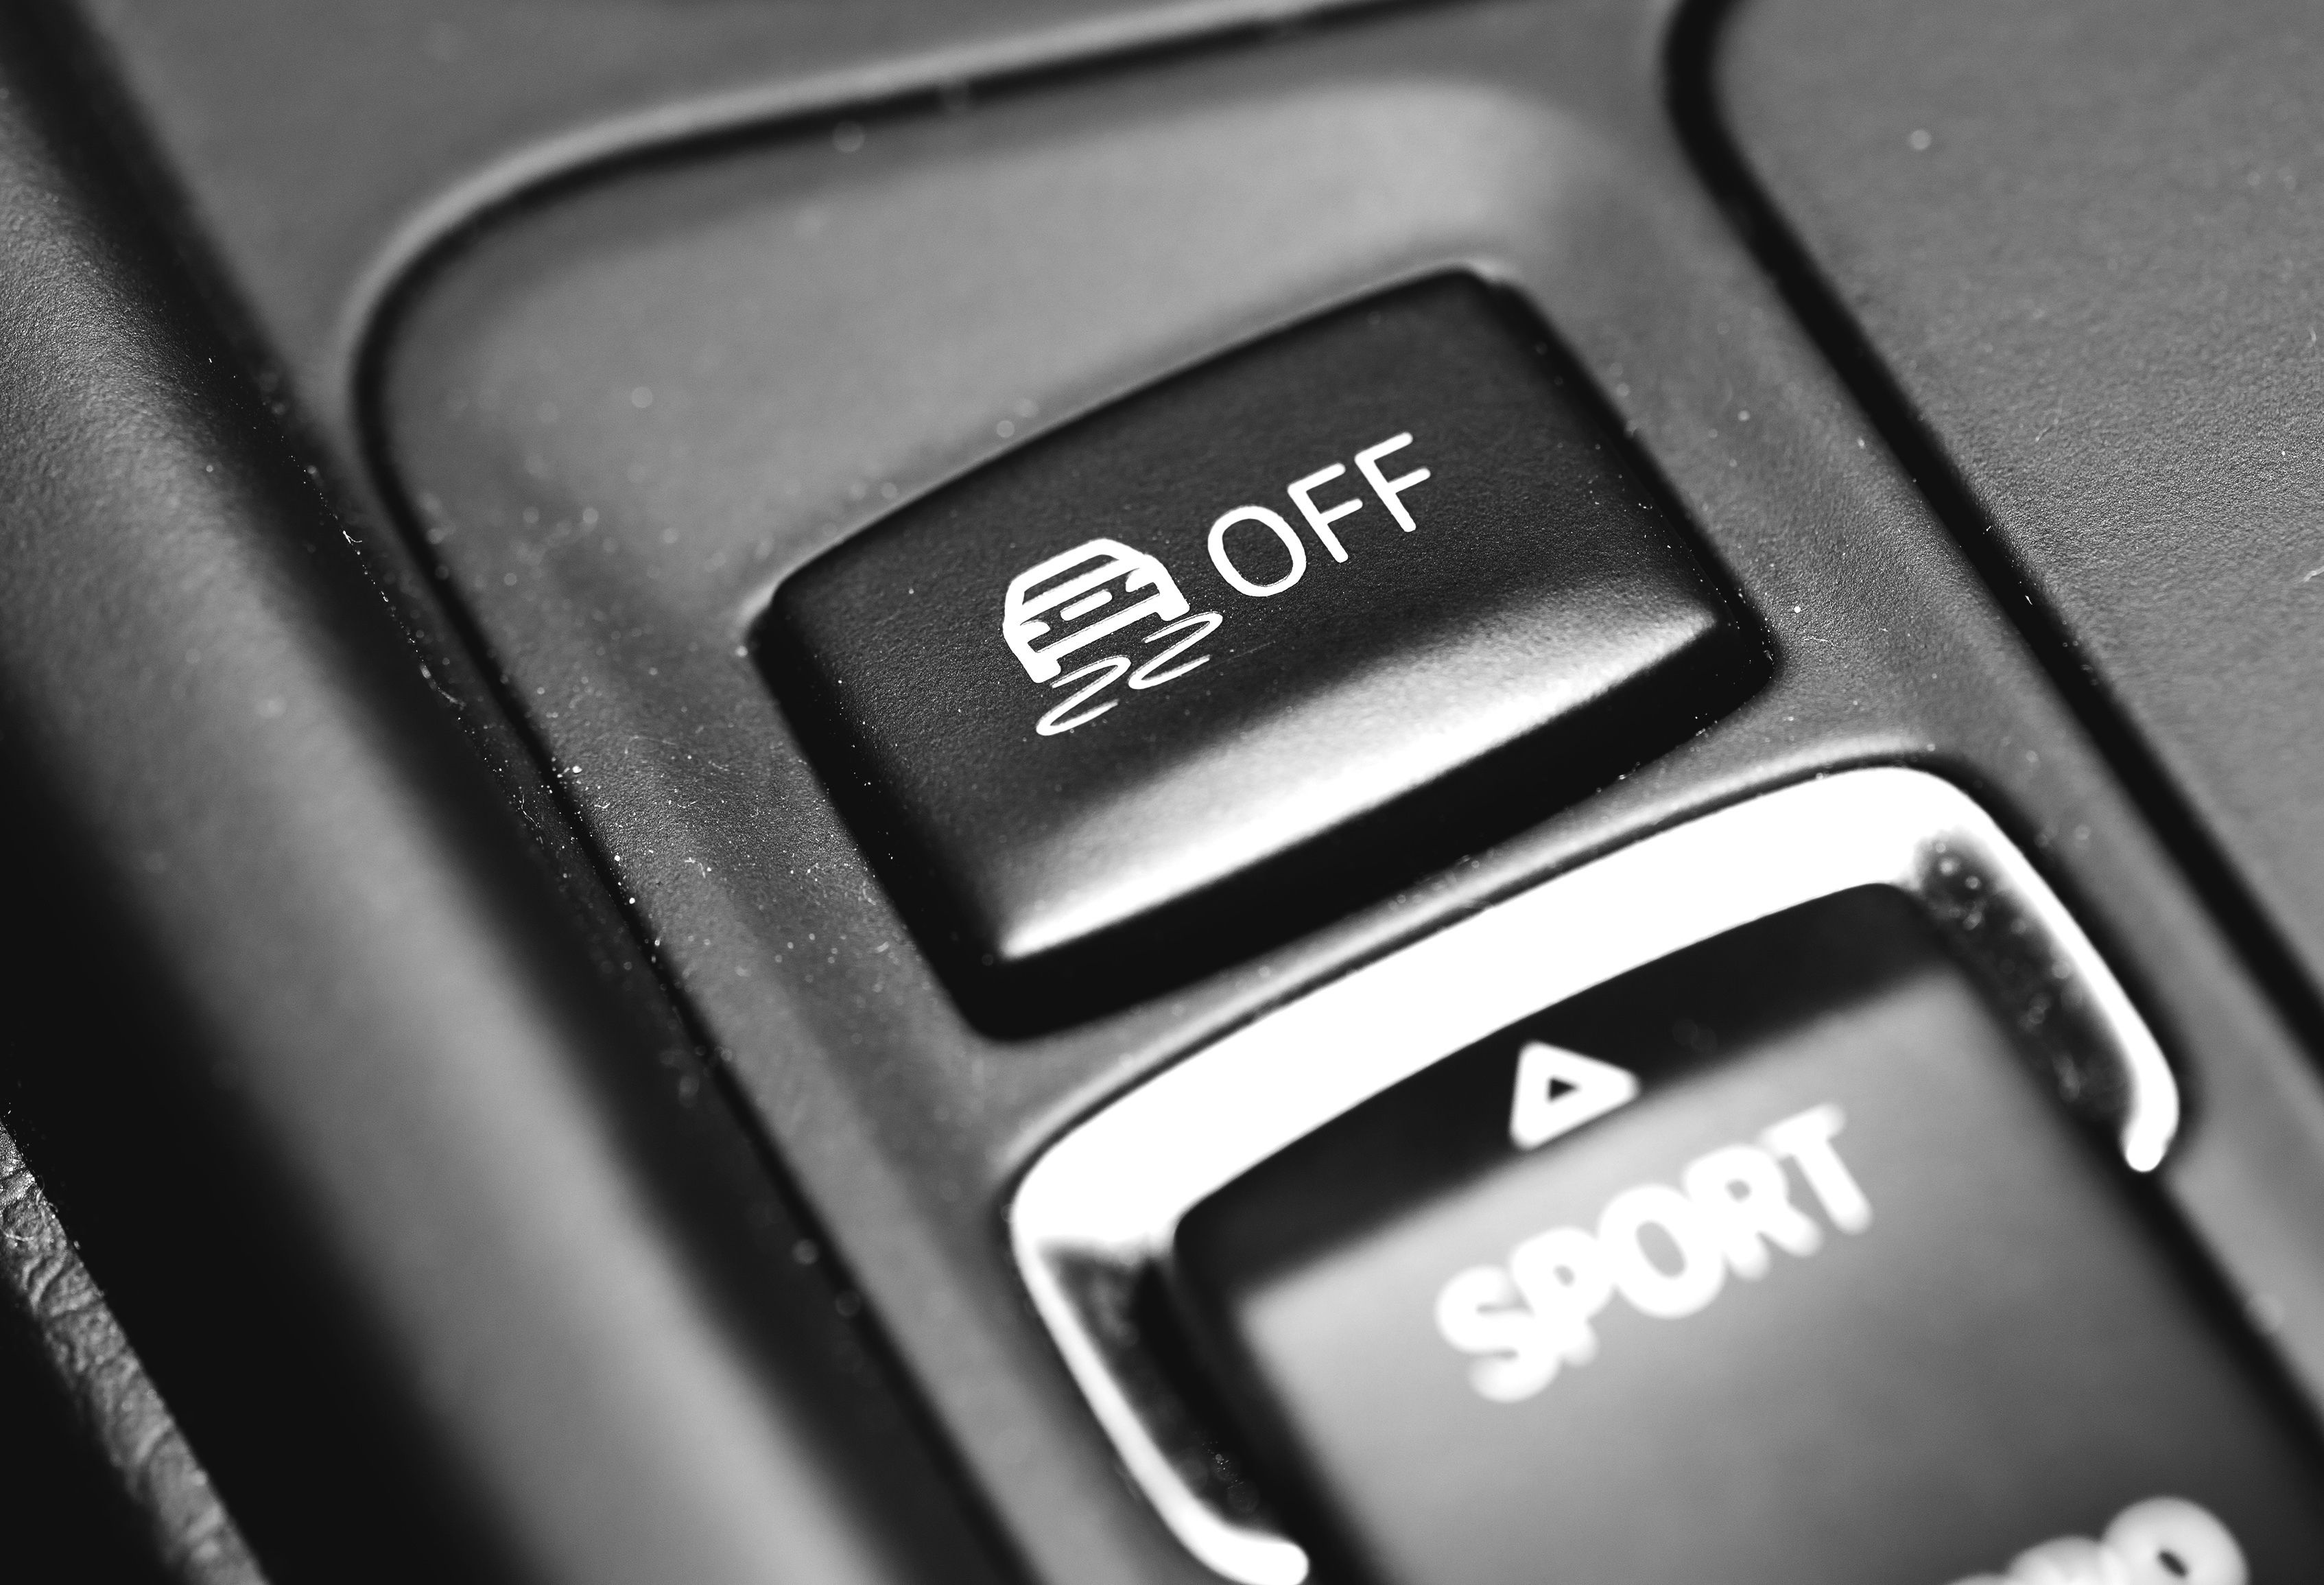 Traction Control And Stability Control: What's The Difference?